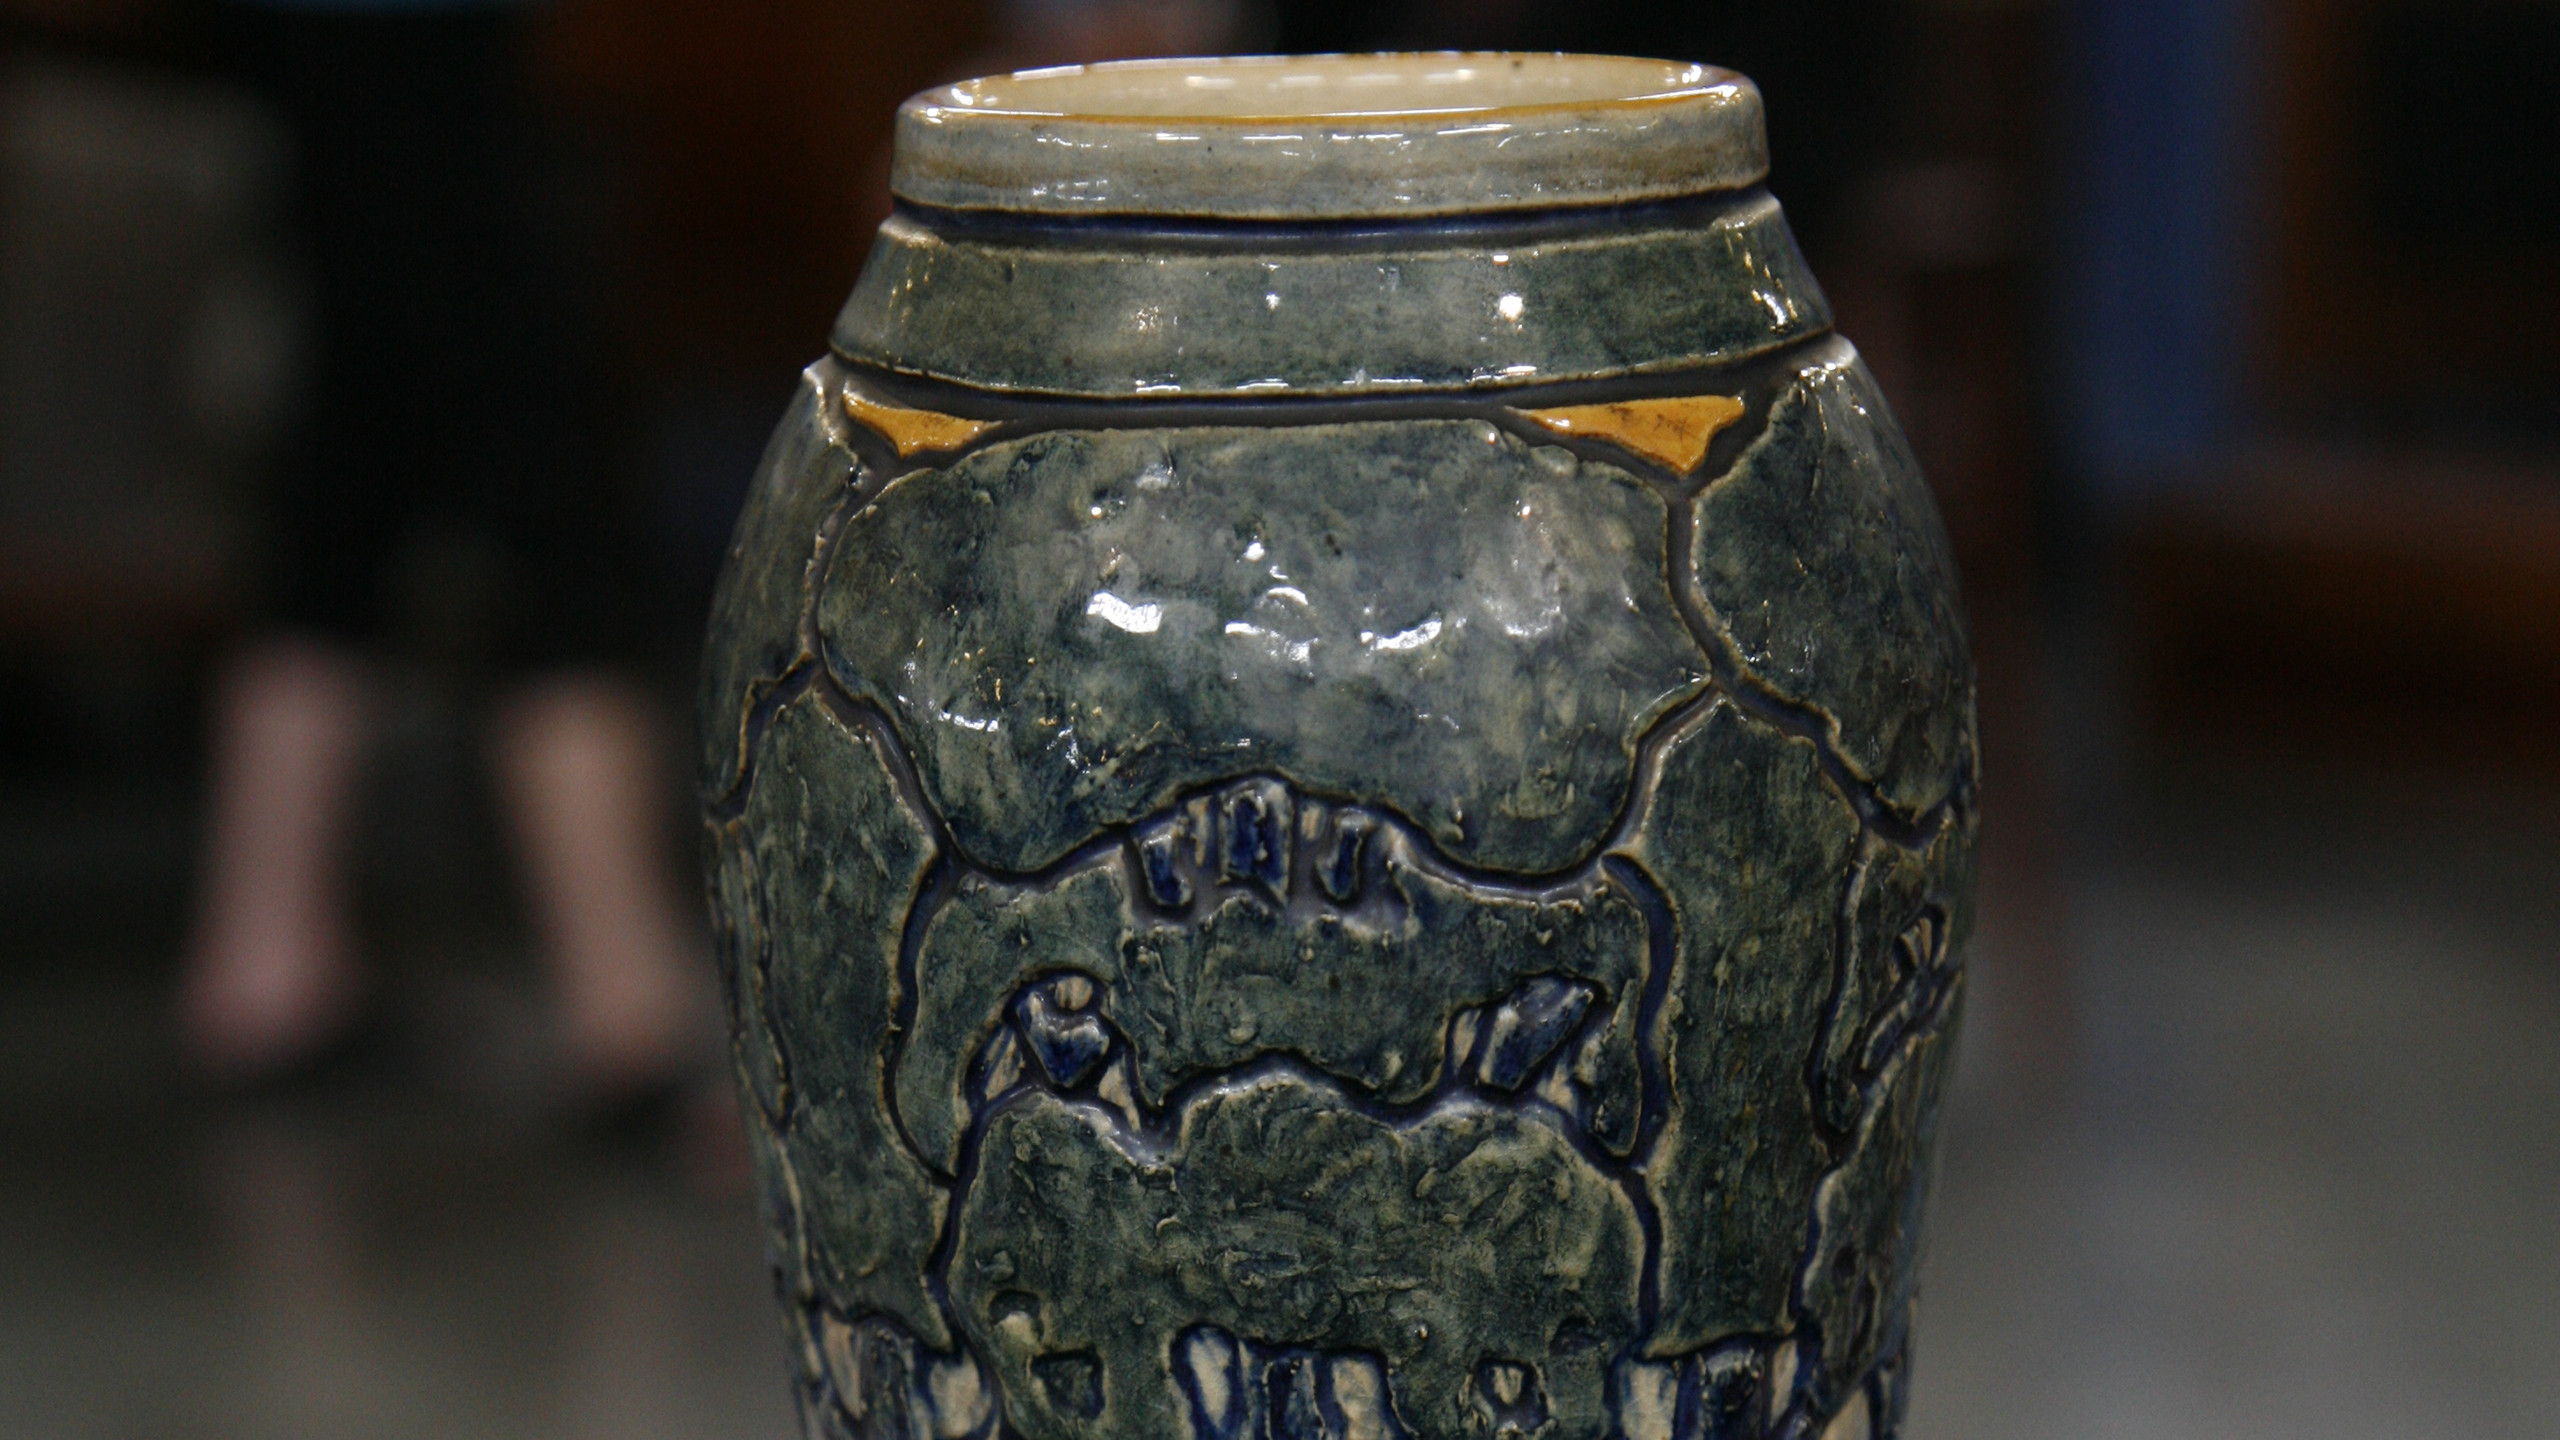 14 Popular Antique Vase Appraisal 2022 free download antique vase appraisal of antiques roadshow appraisal newcomb college vase ca 1908 twin with regard to appraisal newcomb college vase ca 1908